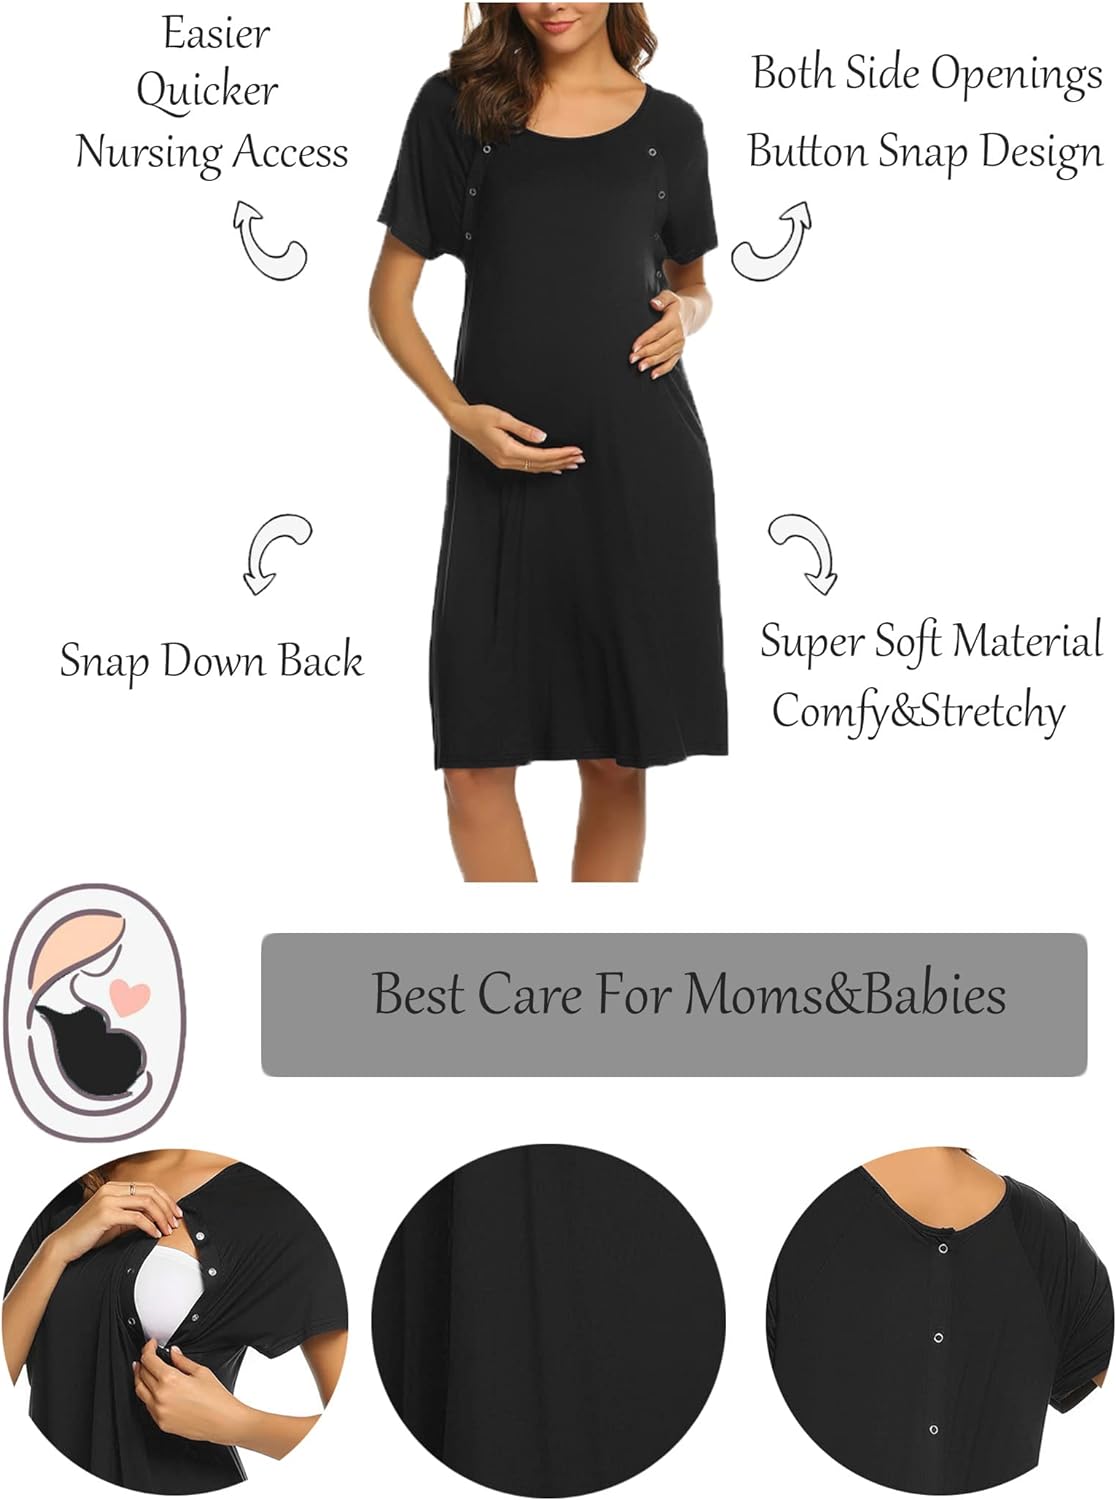 Ekouaer Women’s Nursing/Delivery/Labor/Hospital Nightdress Short Sleeve Maternity Nightgown with Button S-XXL